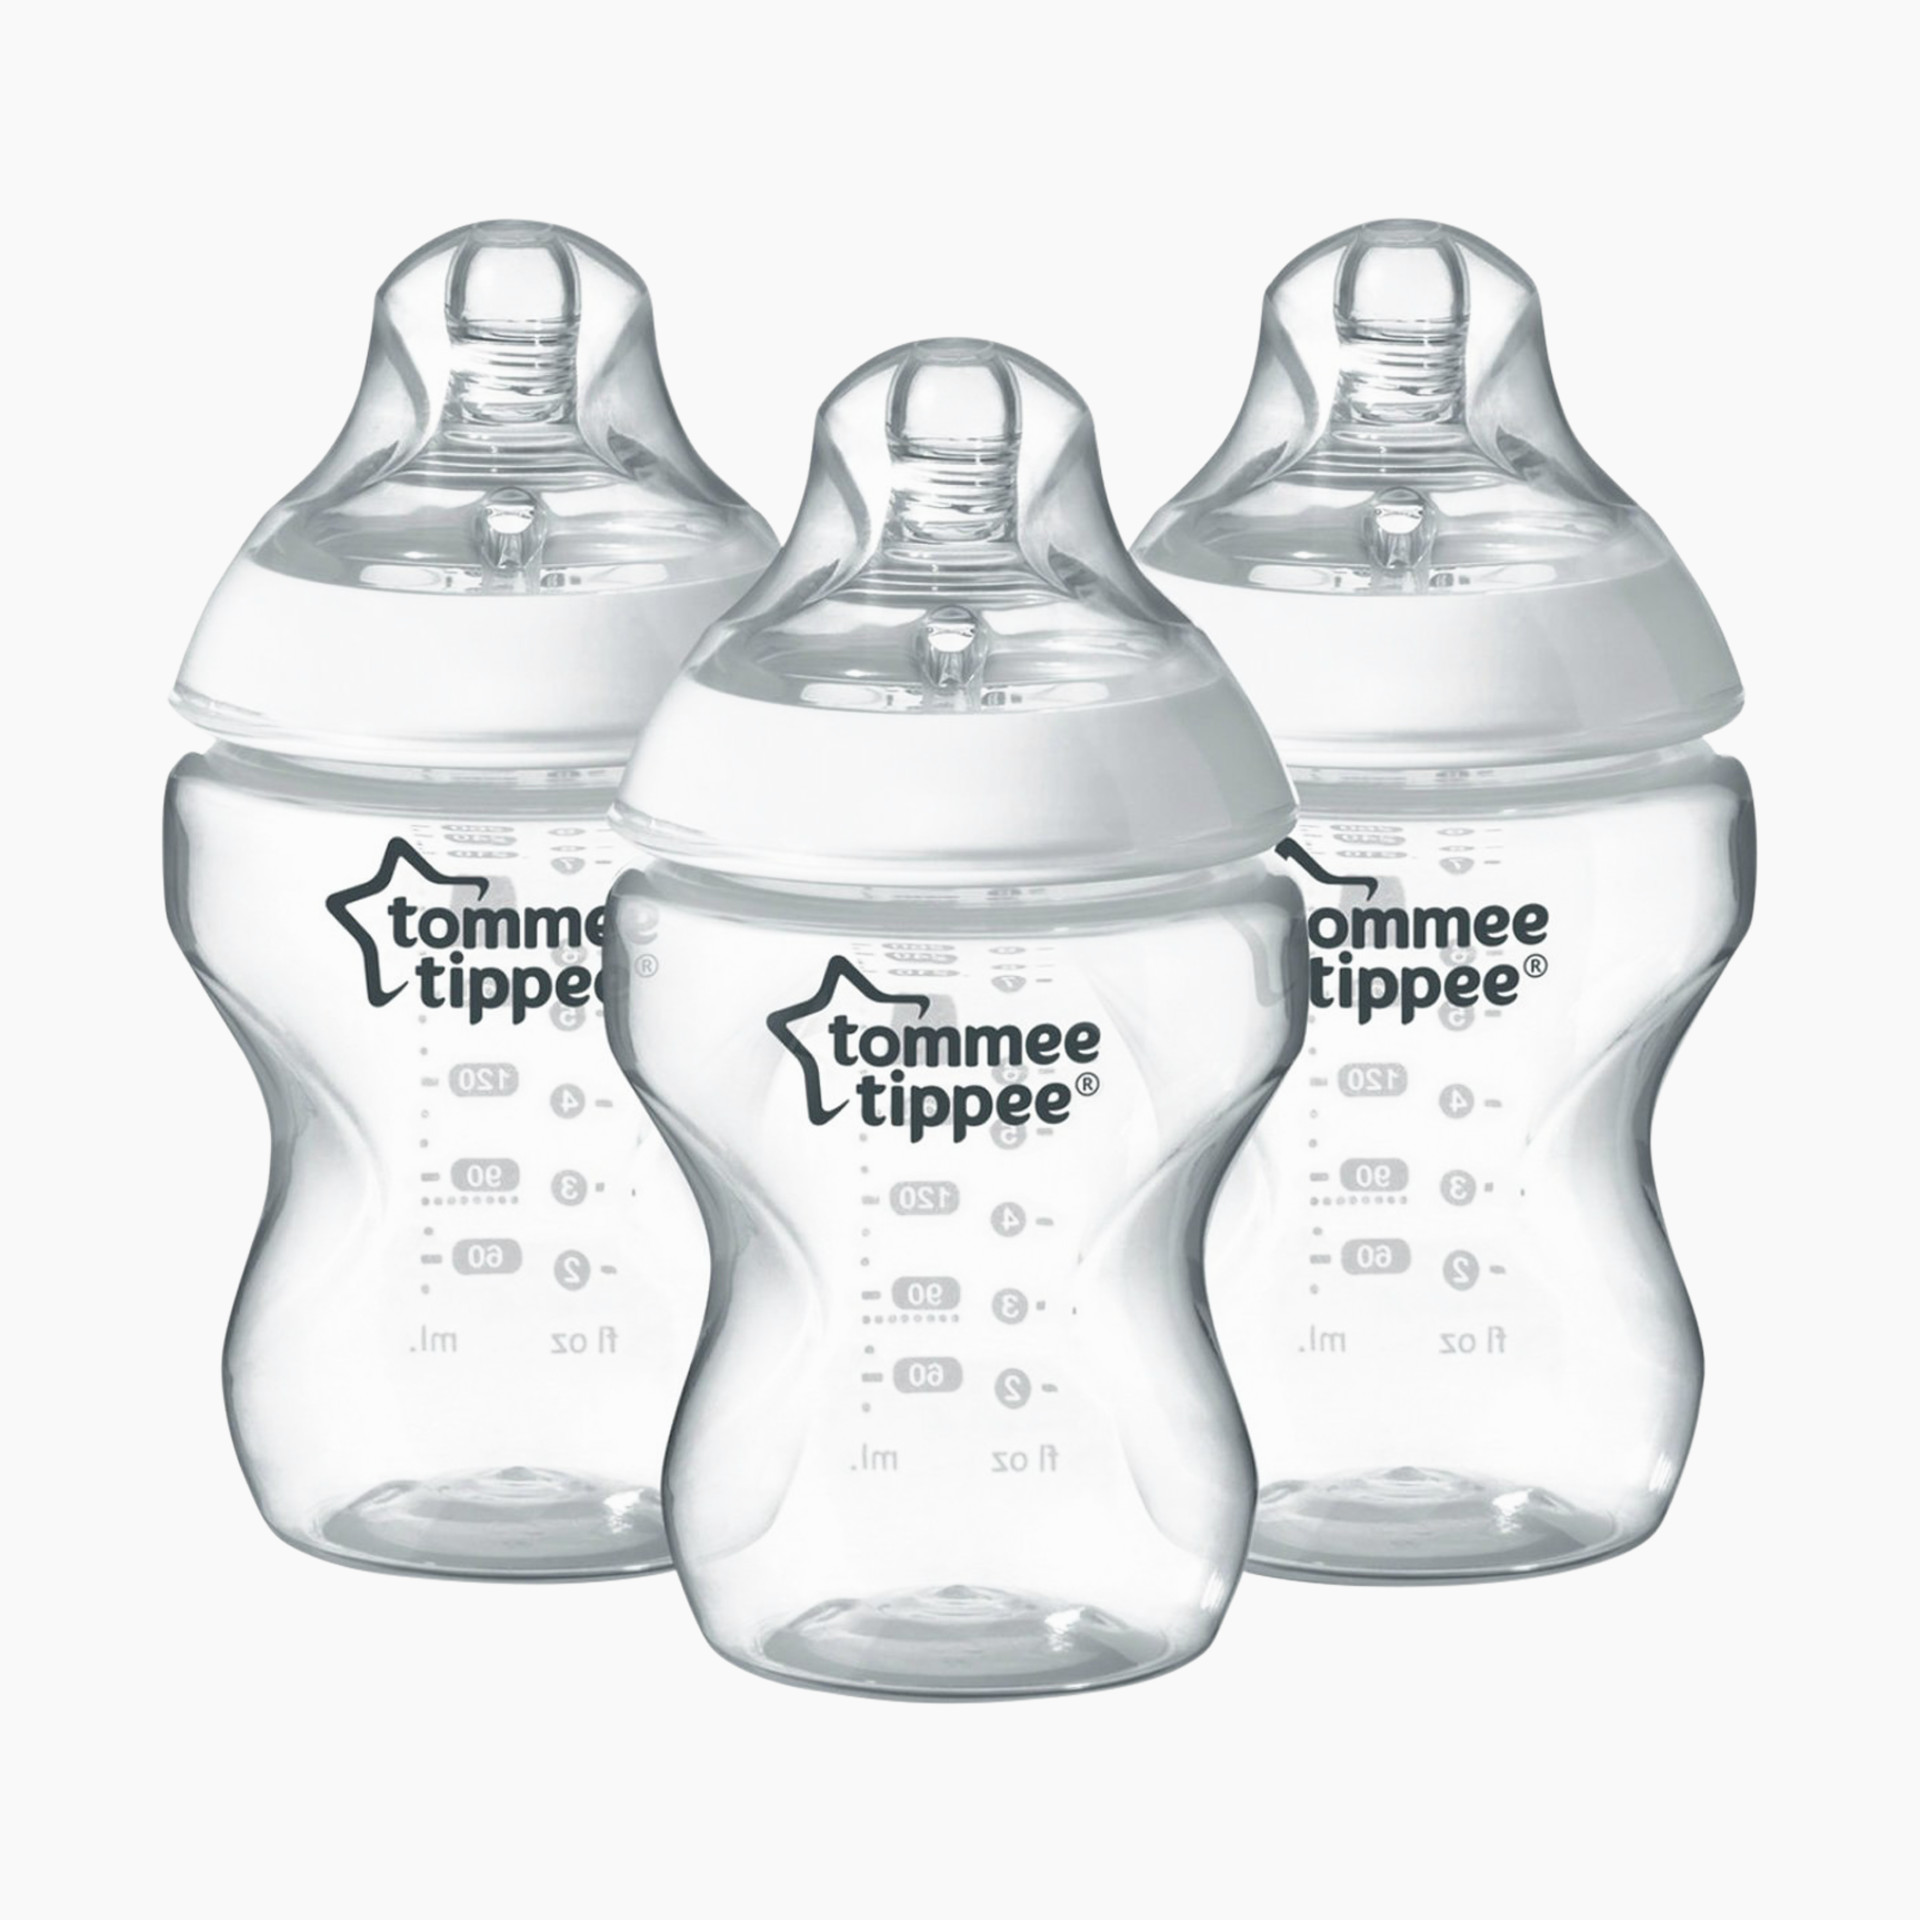 Tommee Tippee Anti-Colic Baby Bottles, Slow Flow Breast-Like Nipple and  Unique Anti-Colic Venting System, 9oz, 4 Count, Clear